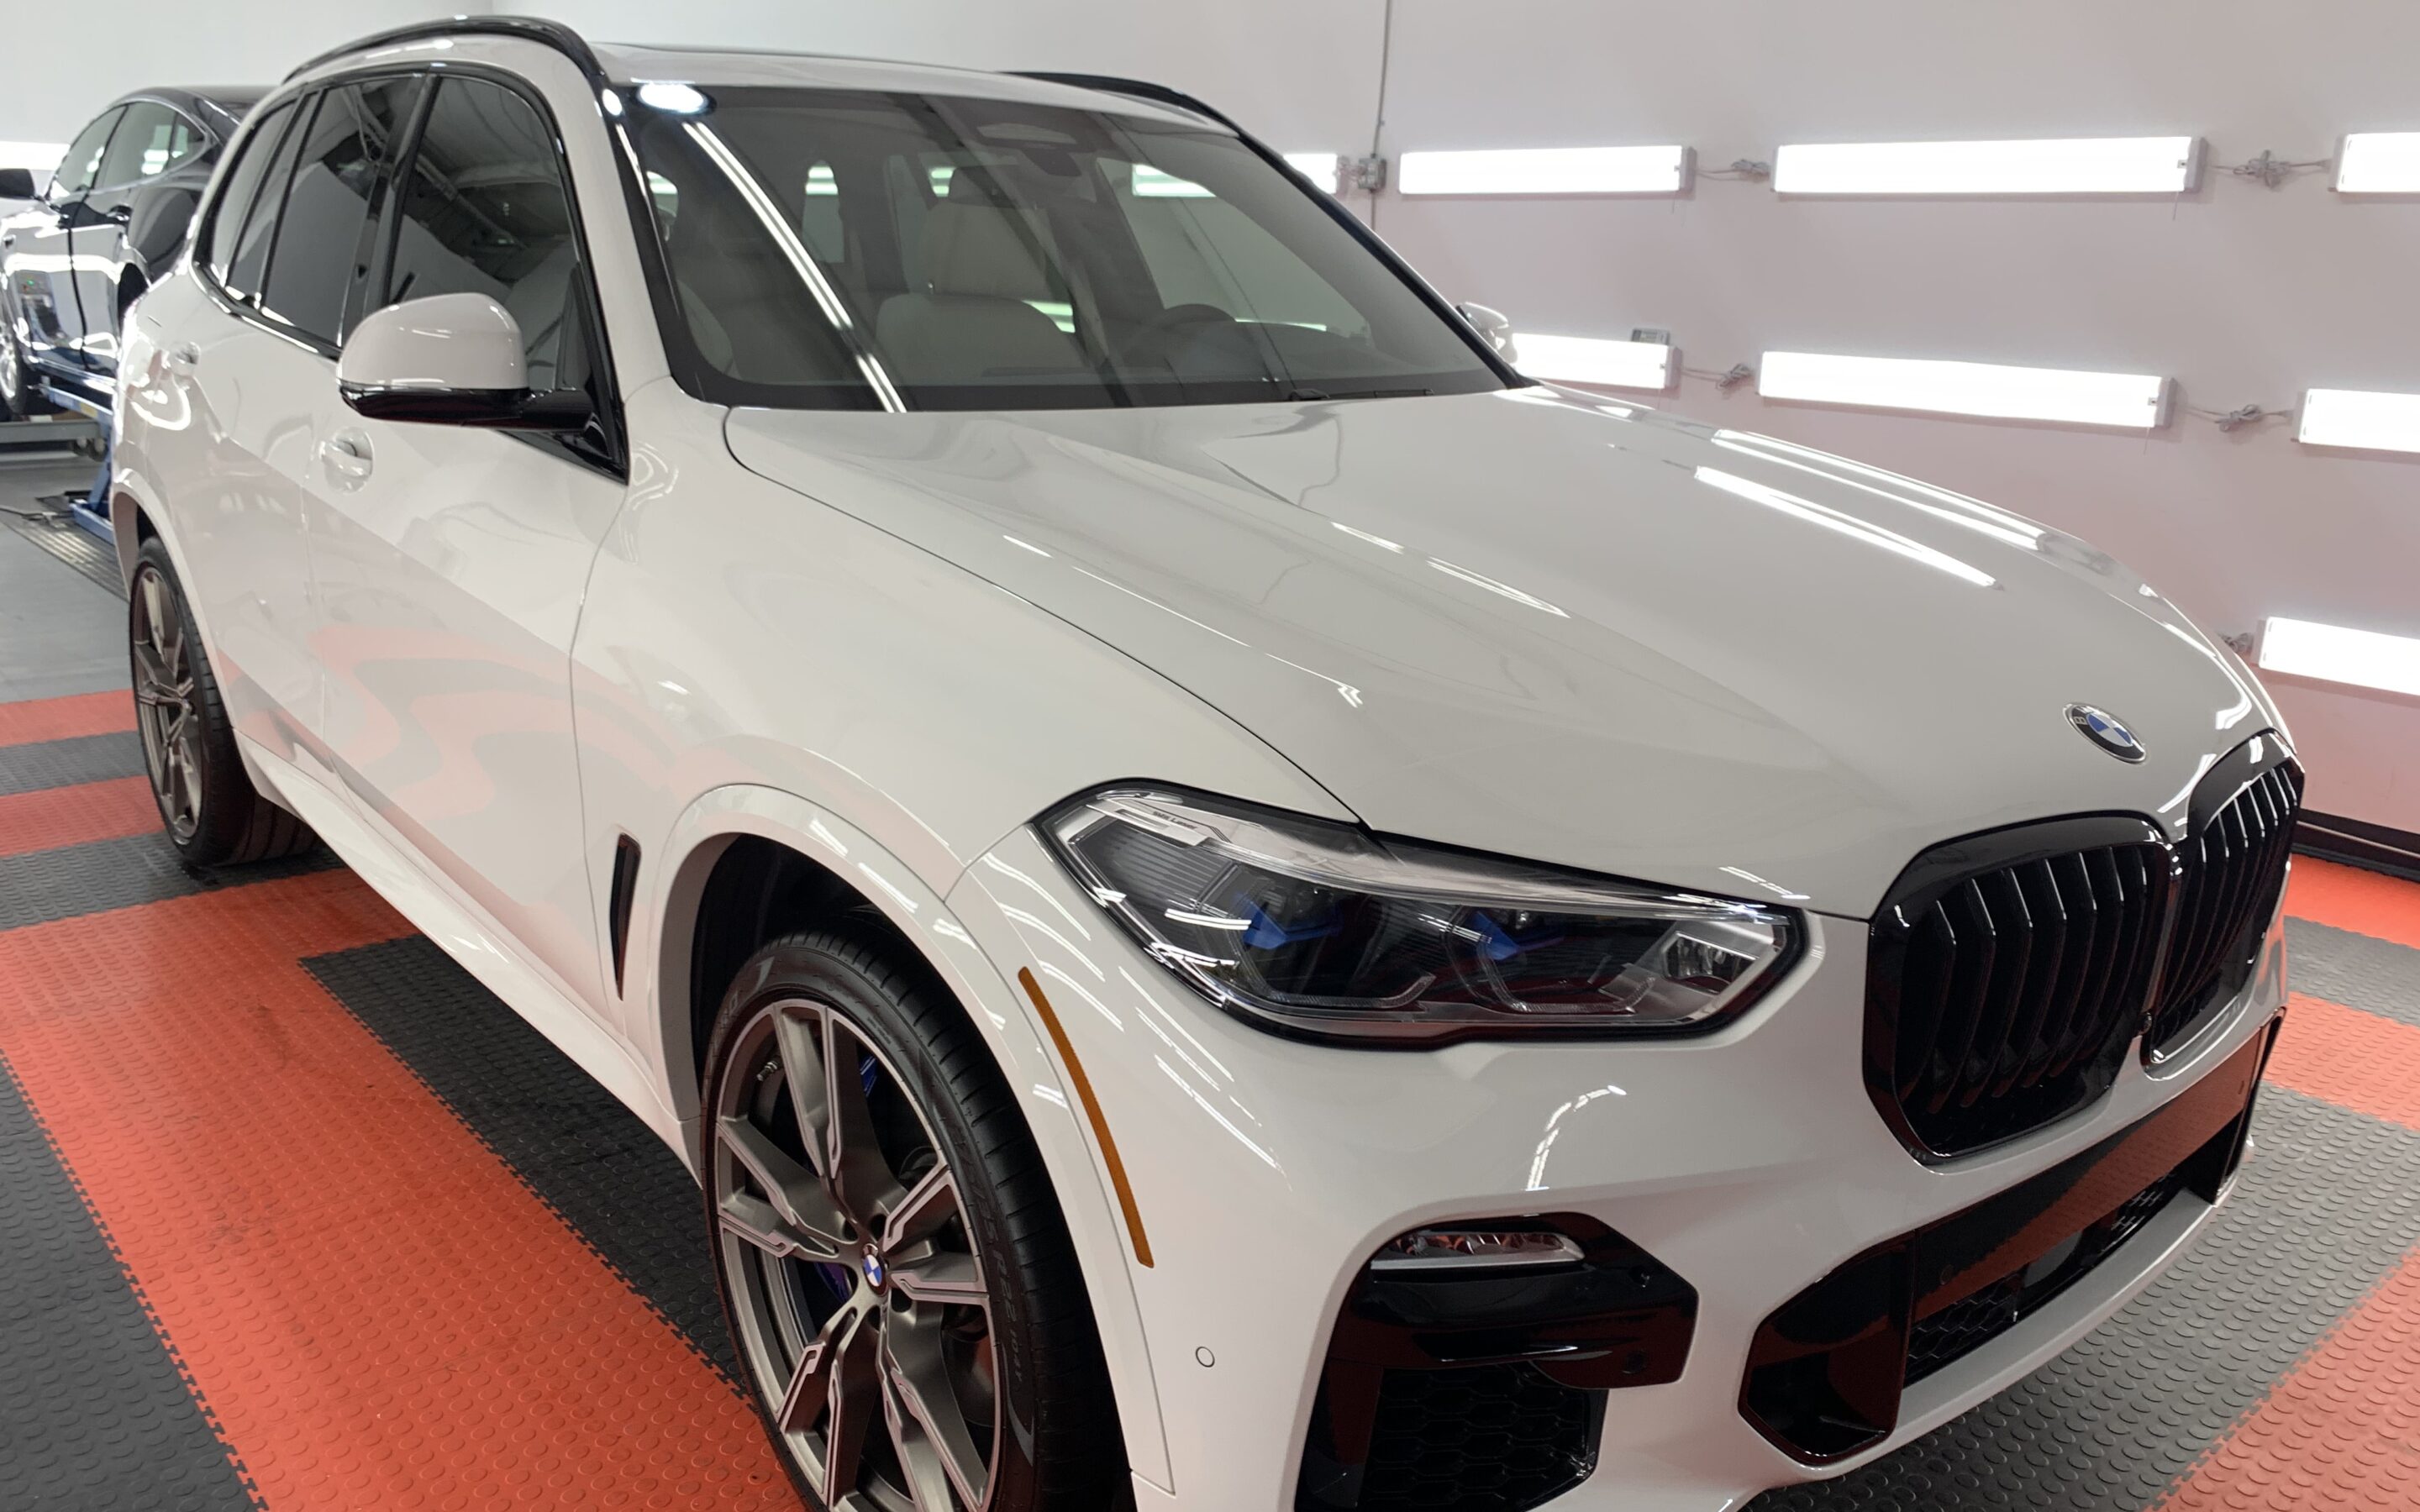 Photo of a New Car Preparation of a 2021 BMW X5